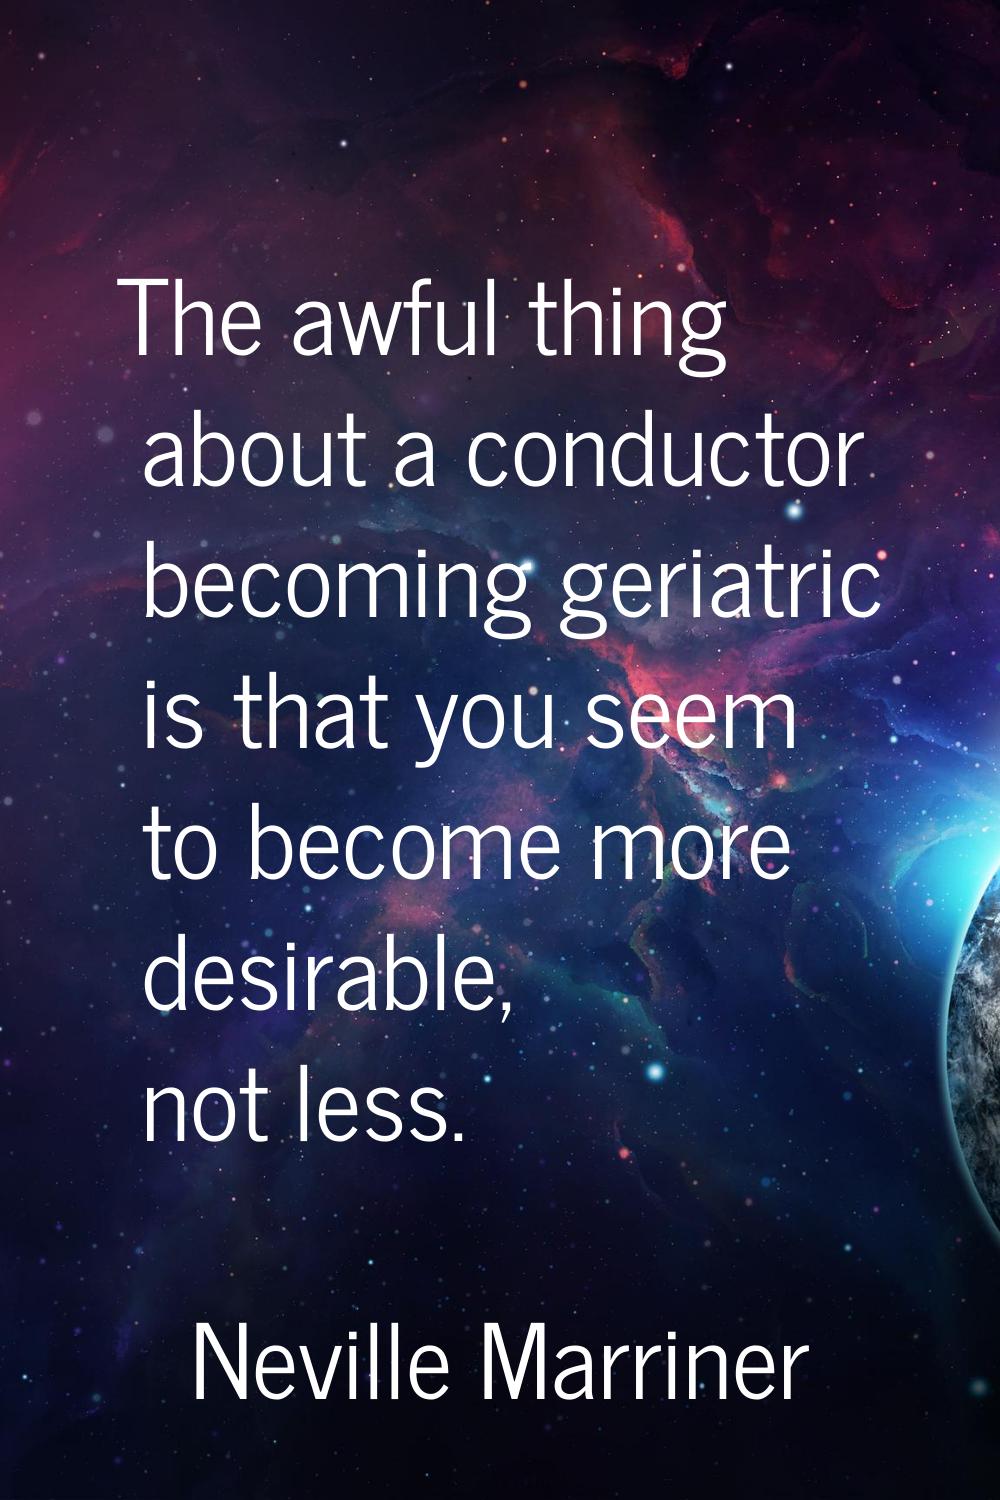 The awful thing about a conductor becoming geriatric is that you seem to become more desirable, not